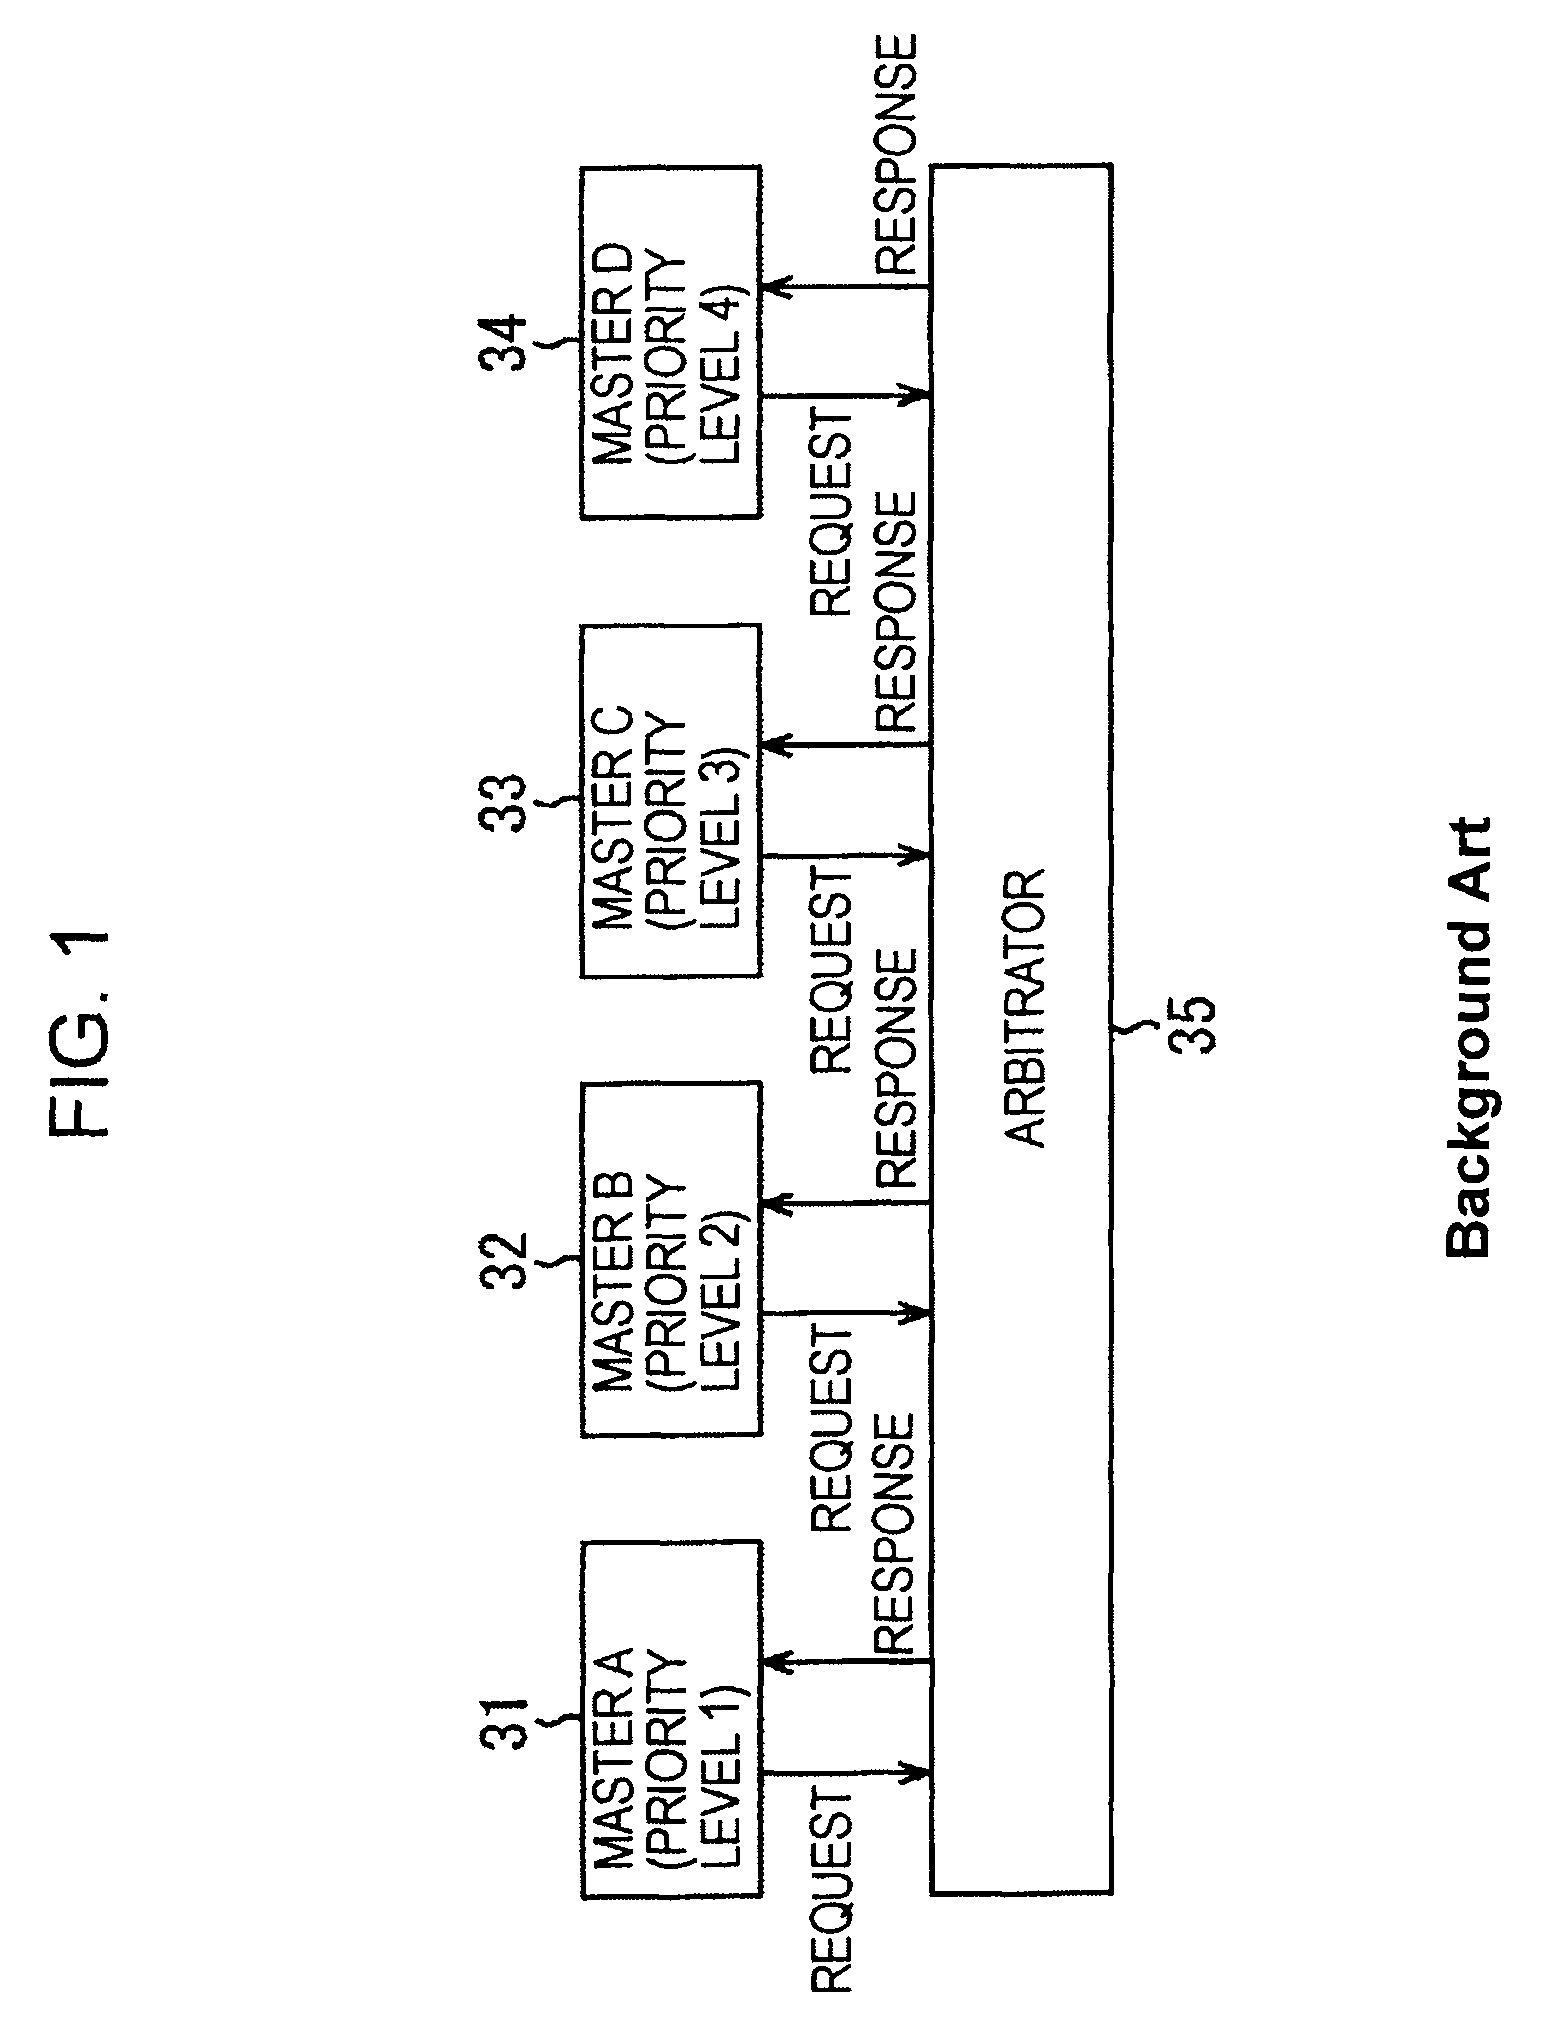 Arbitration apparatus, method, and computer readable medium with dynamically adjustable priority scheme